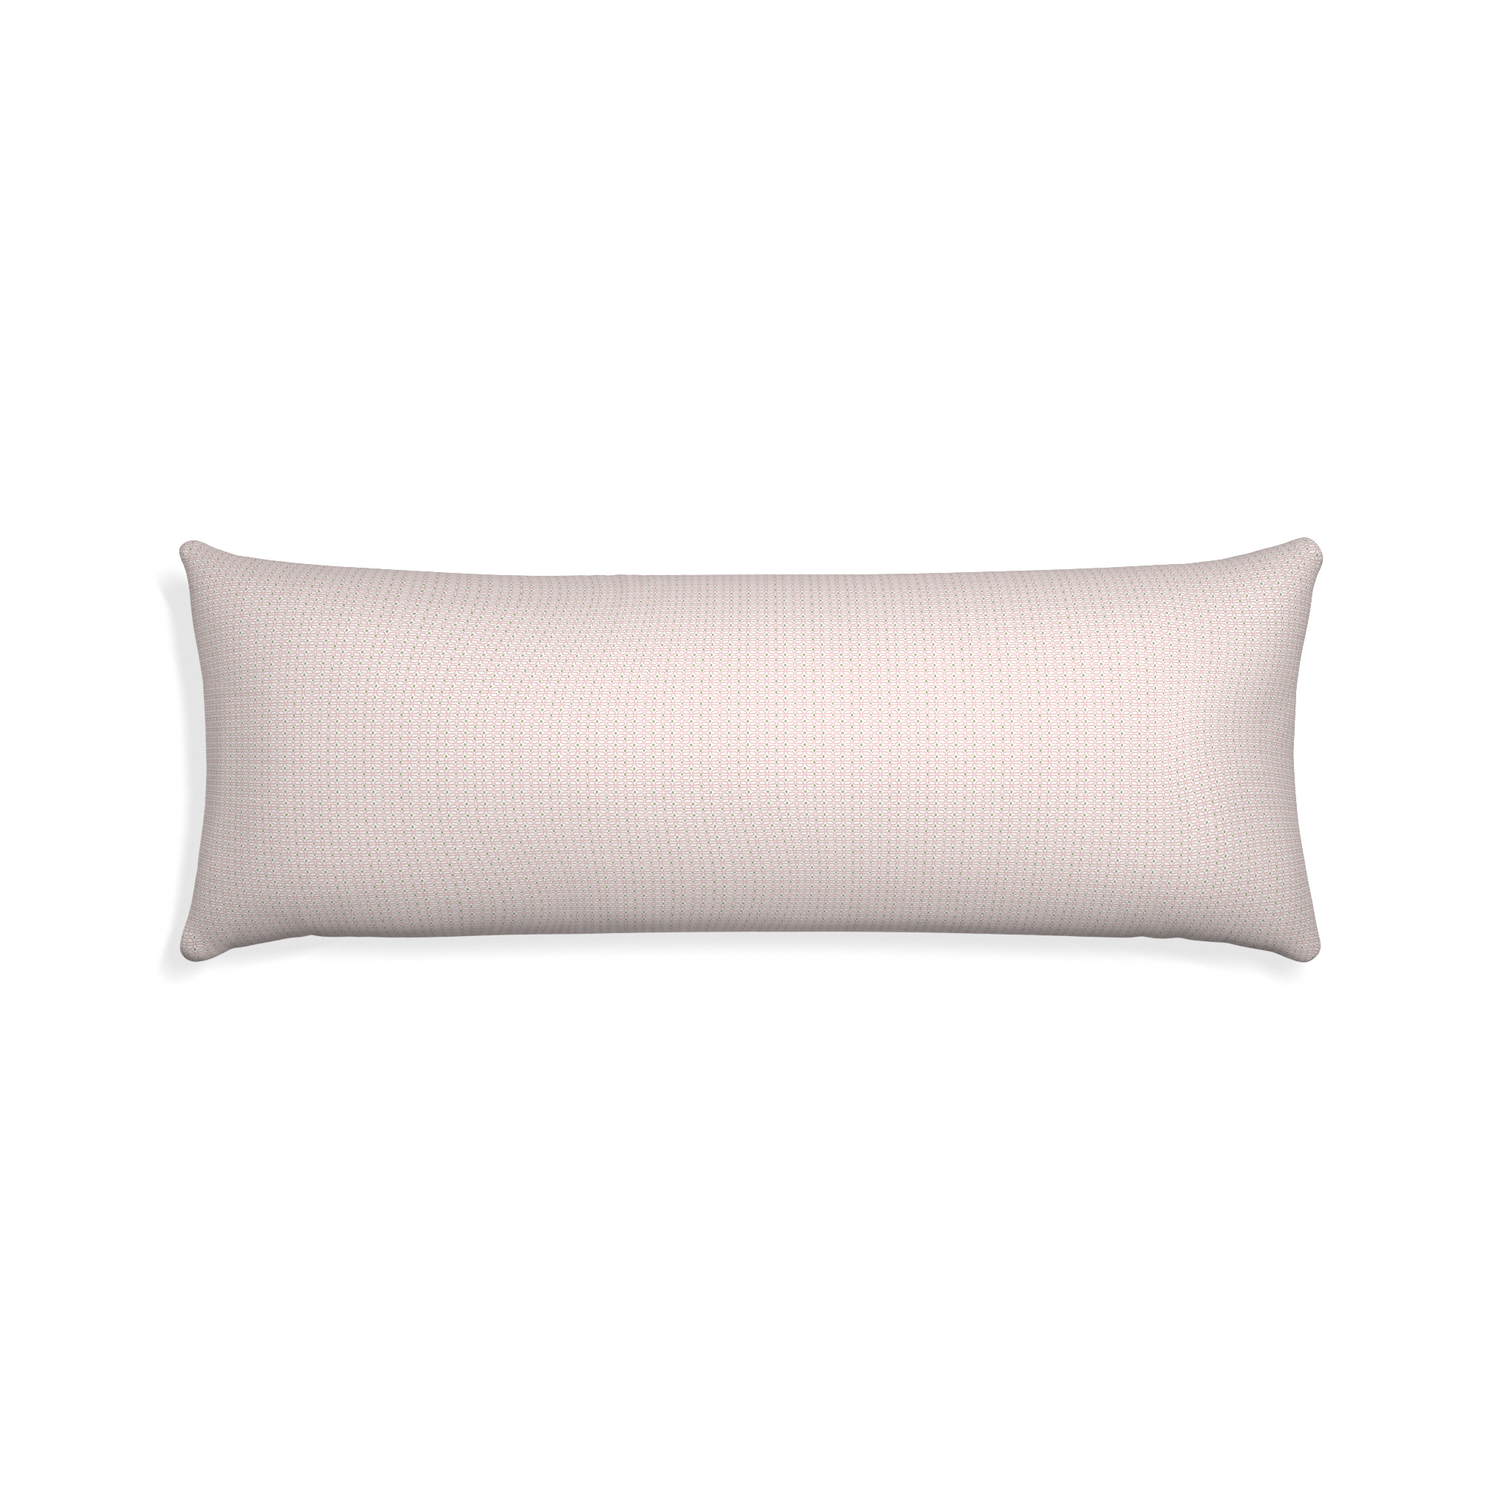 Xl-lumbar loomi pink custom pillow with none on white background